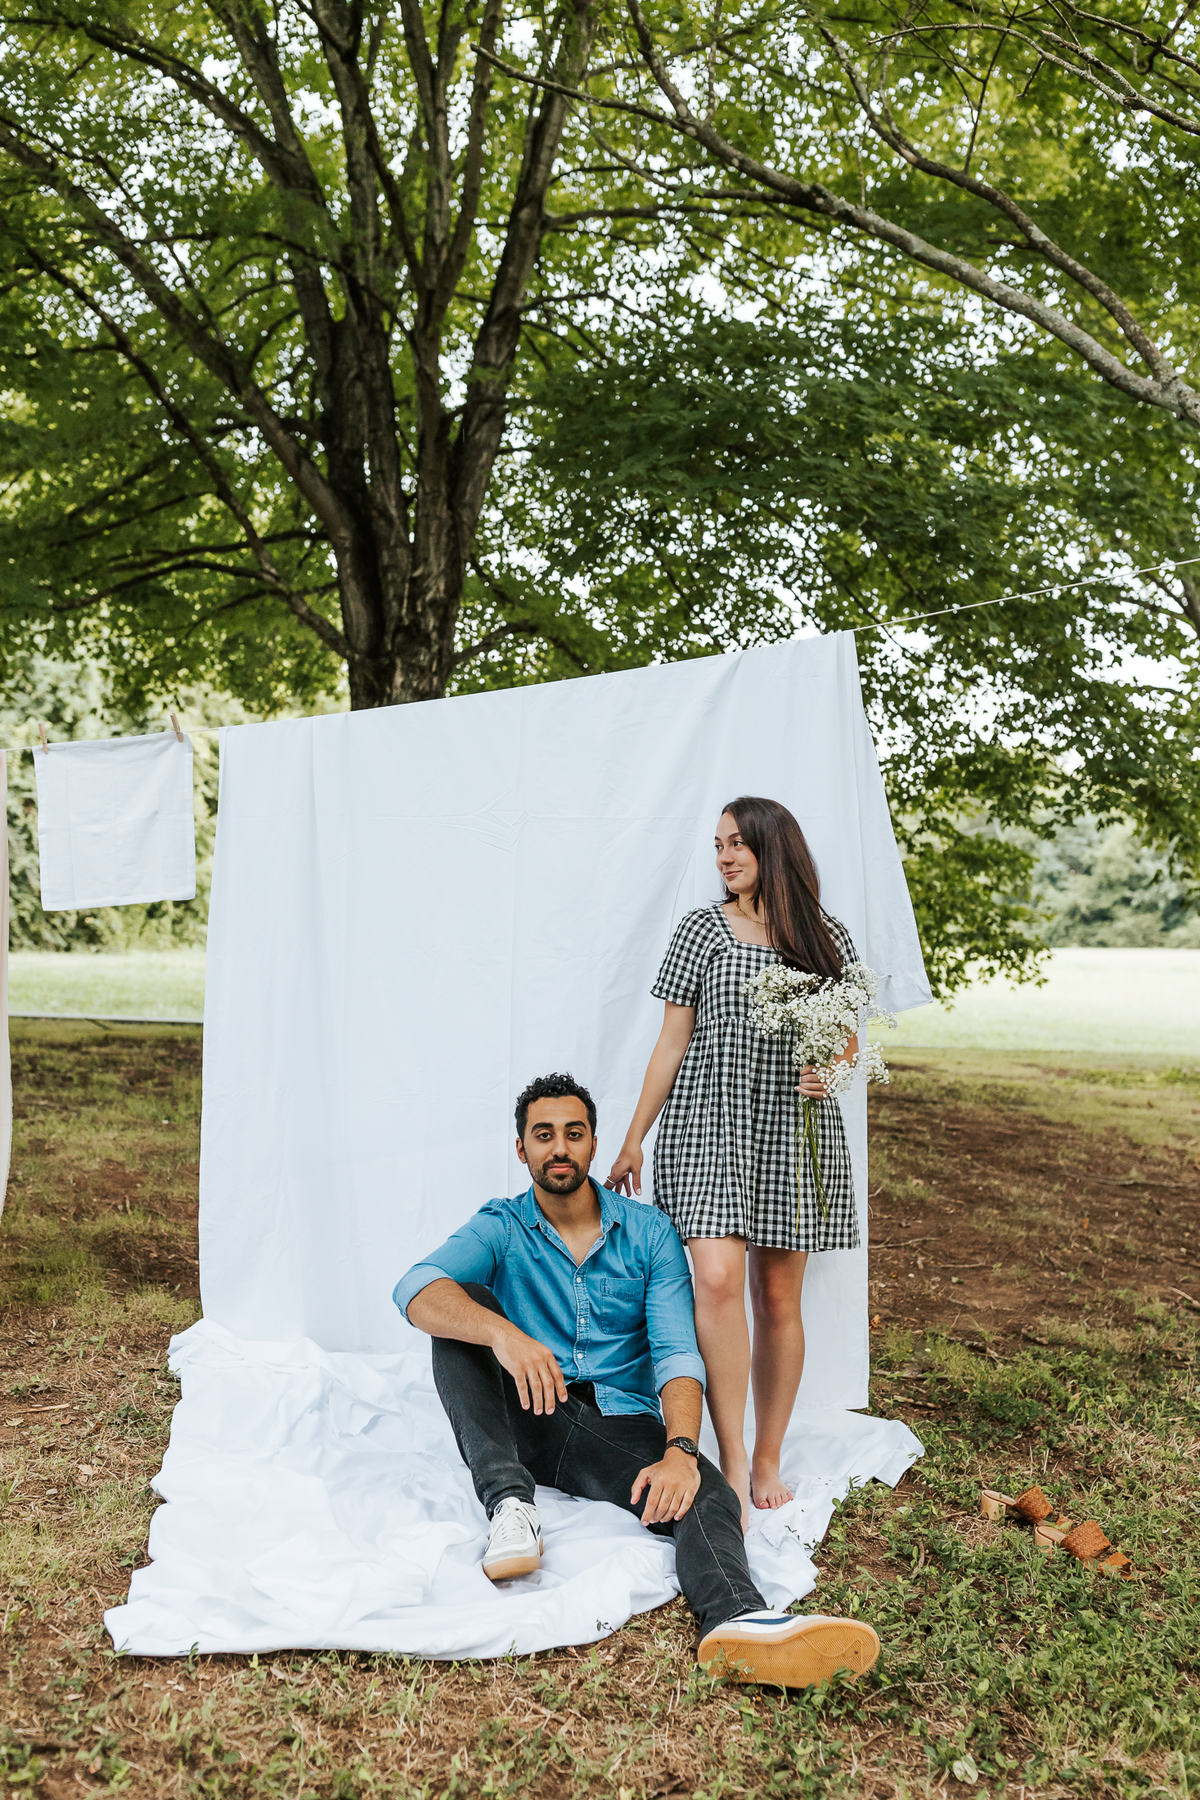 Clothesline Couples Session | Knoxville, TN | Carly Crawford Photography | Knoxville and East Tennessee Wedding, Couples, and Portrait Photographer-245927